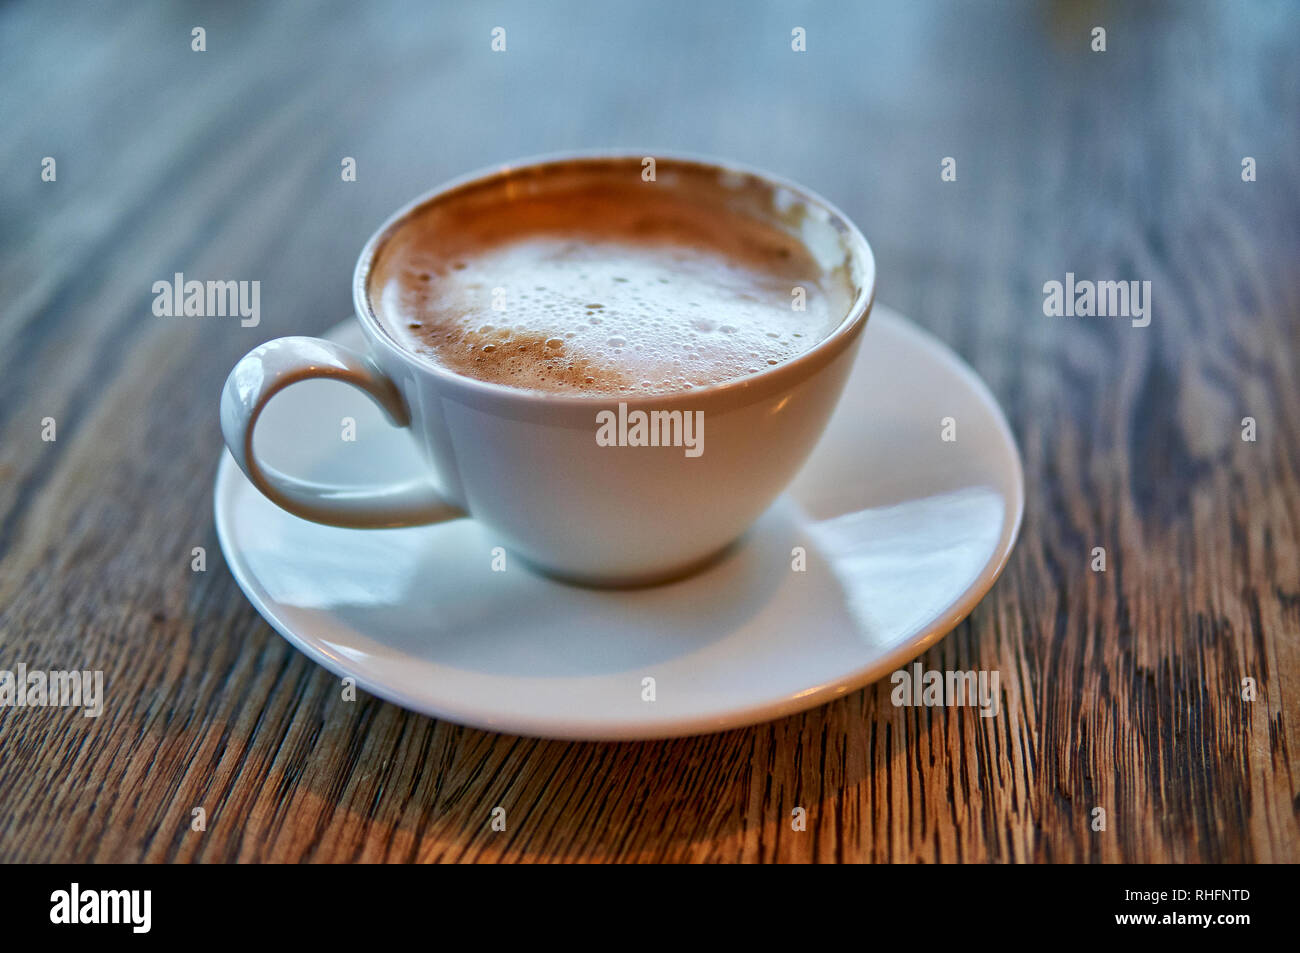 Hot Cappuccino In White Cup On Wooden Table placed centrally Stock Photo